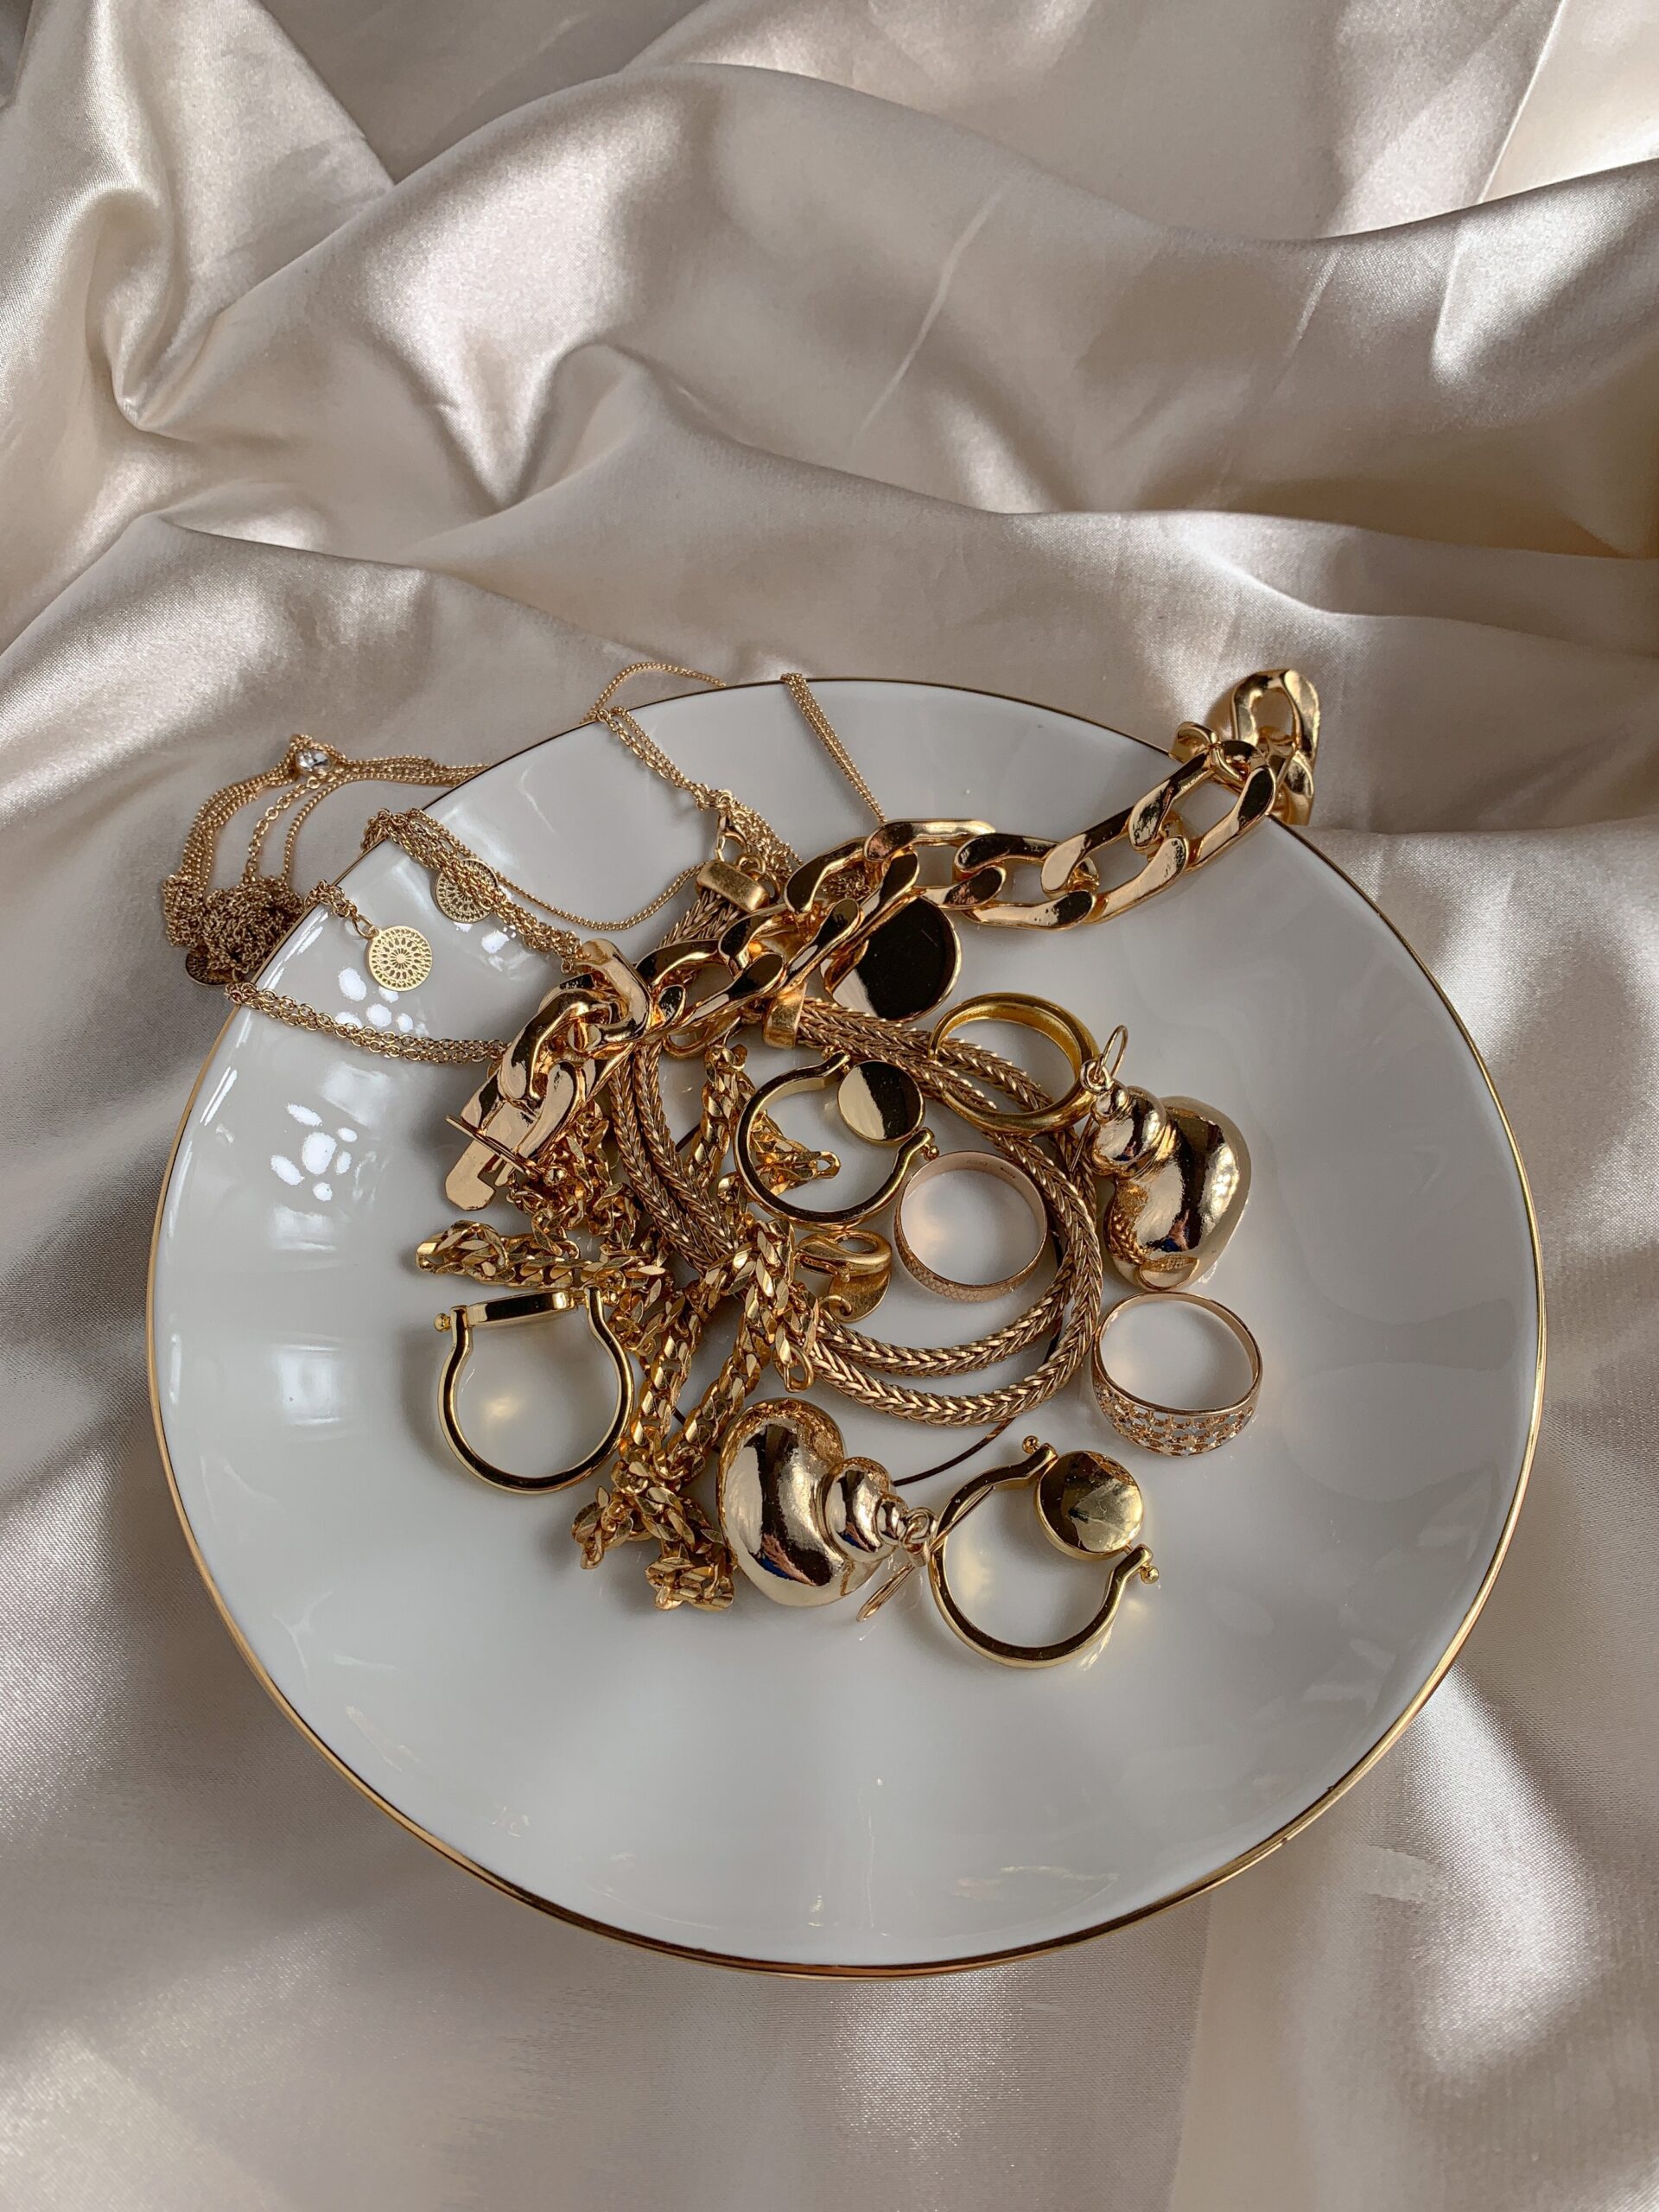 gold jewelry on a catch plate